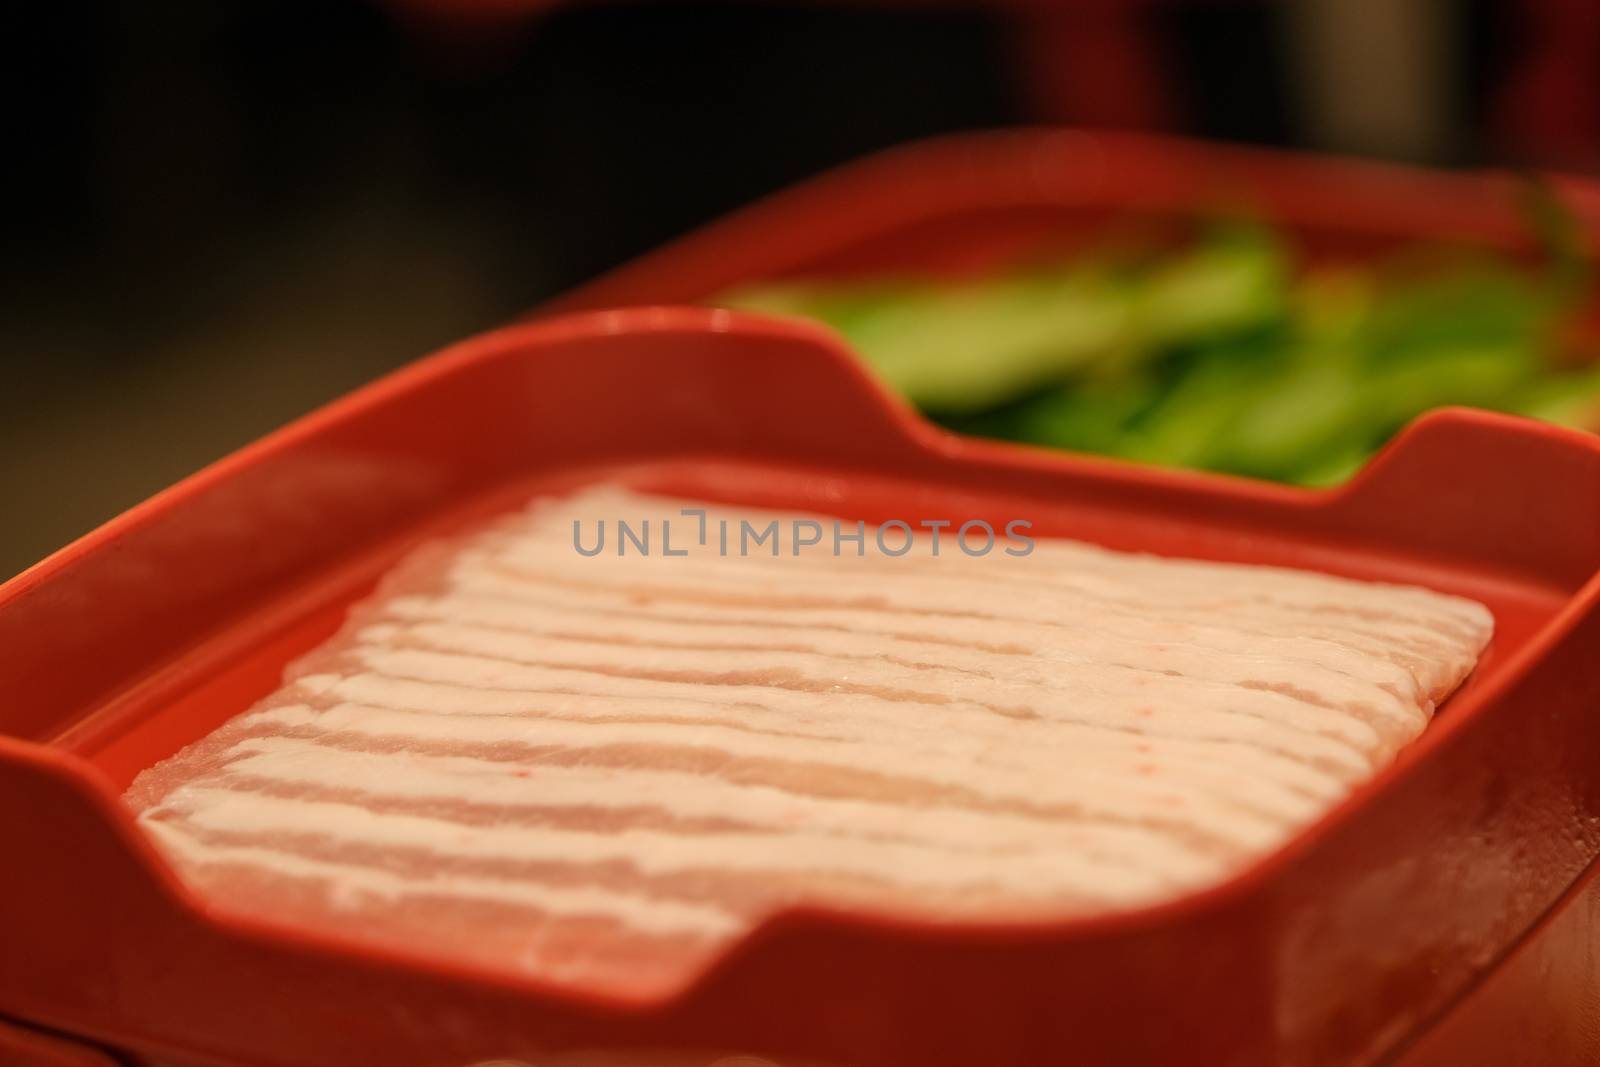 The sliced raw pork meat isolated on a red plate background. Top view.